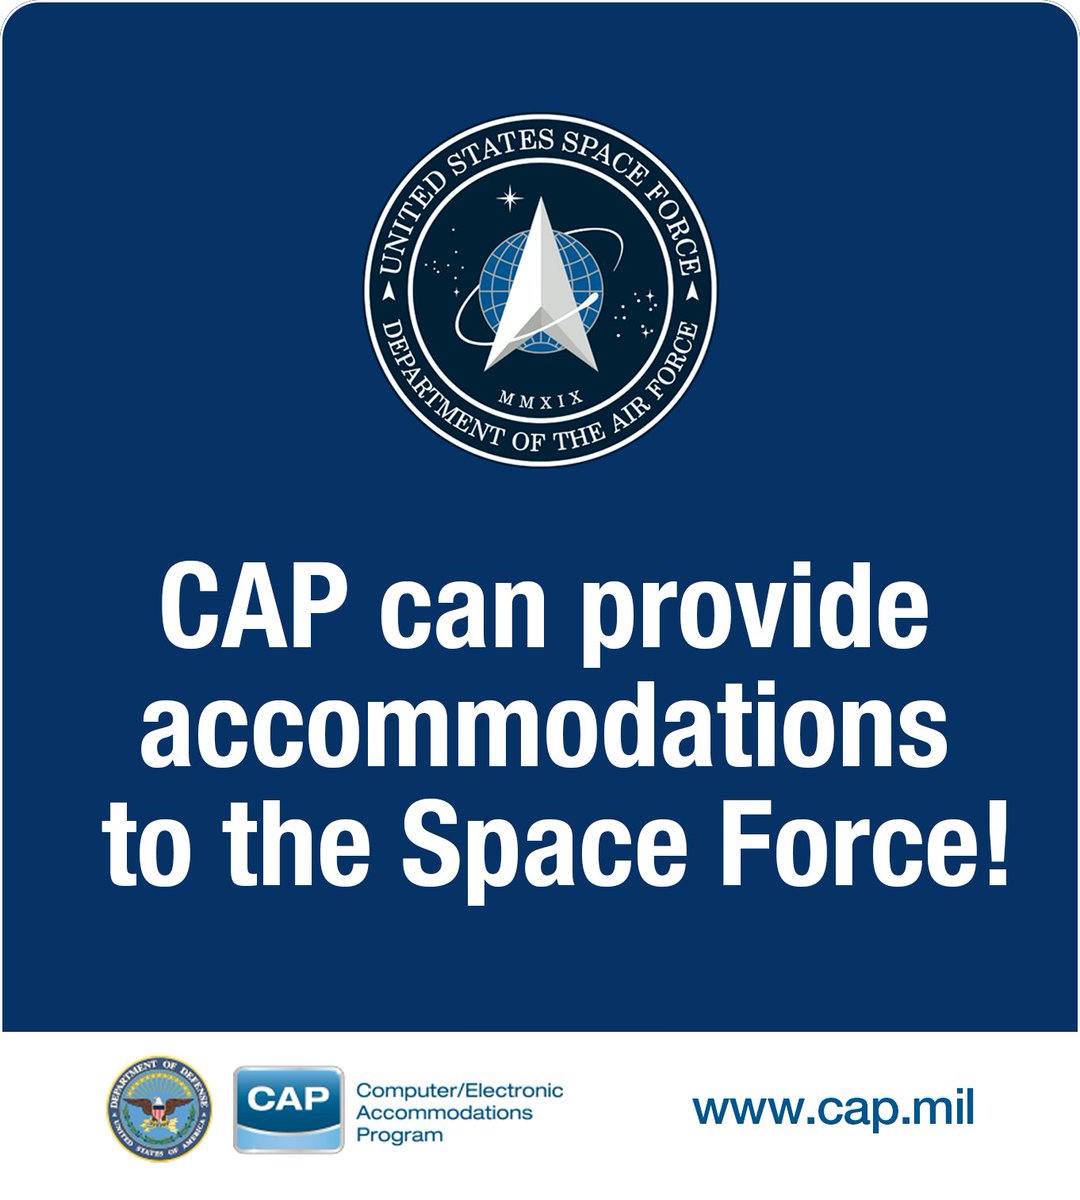 Are you a #WoundedWarrior in the U.S. Space Force? CAP can support you with workplace accommodations! Submit a request at cap.mil and reach out to cap@mail.mil if you need assistance. #MilitaryAppreciationMonth